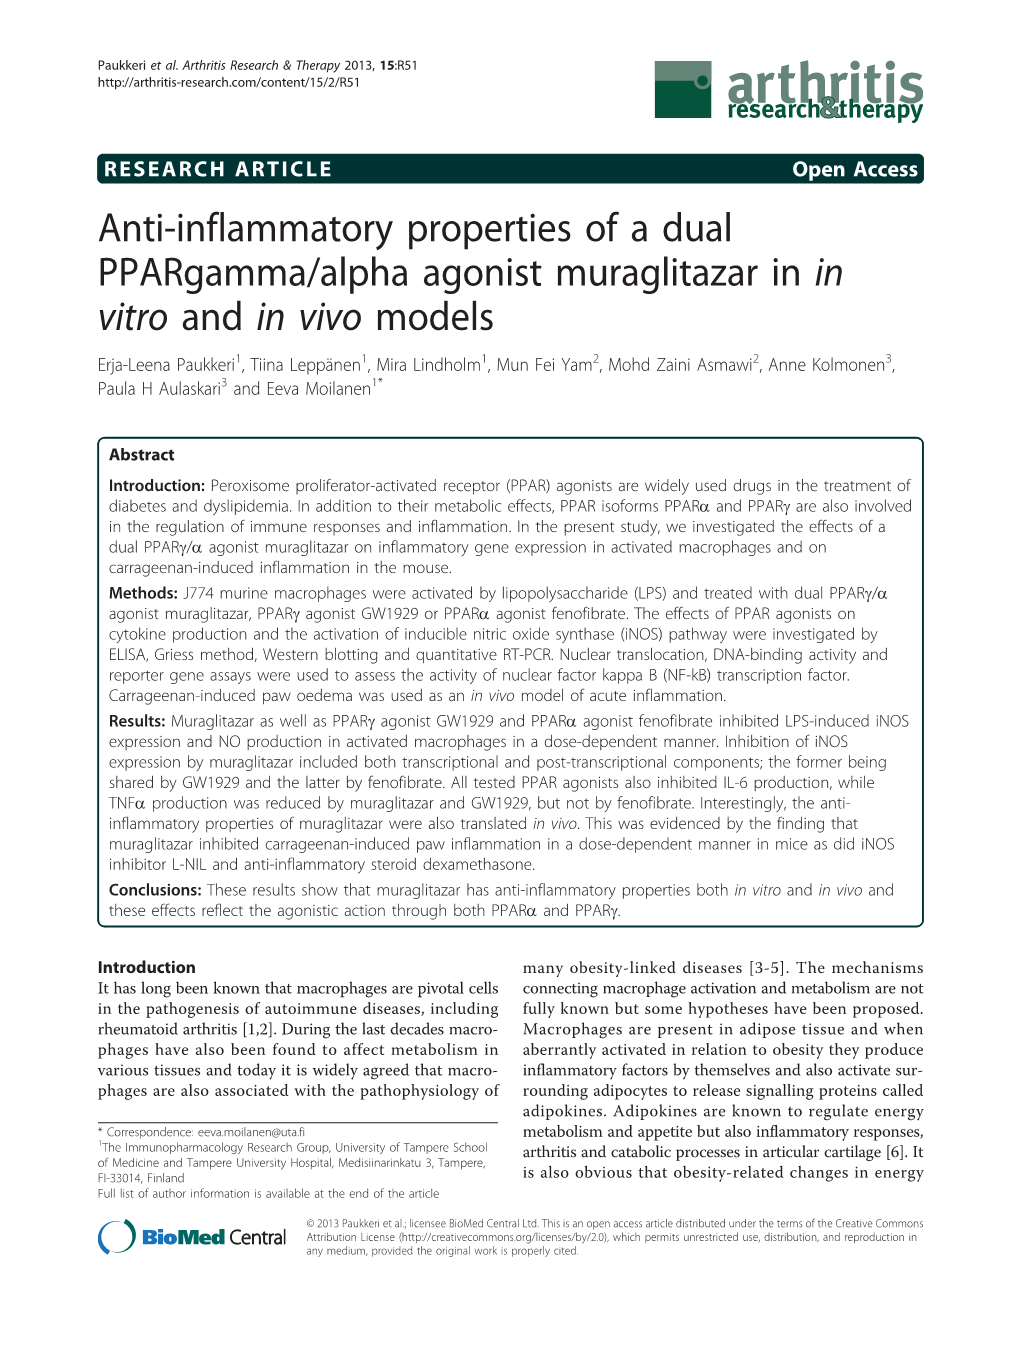 Anti-Inflammatory Properties of a Dual Ppargamma/Alpha Agonist